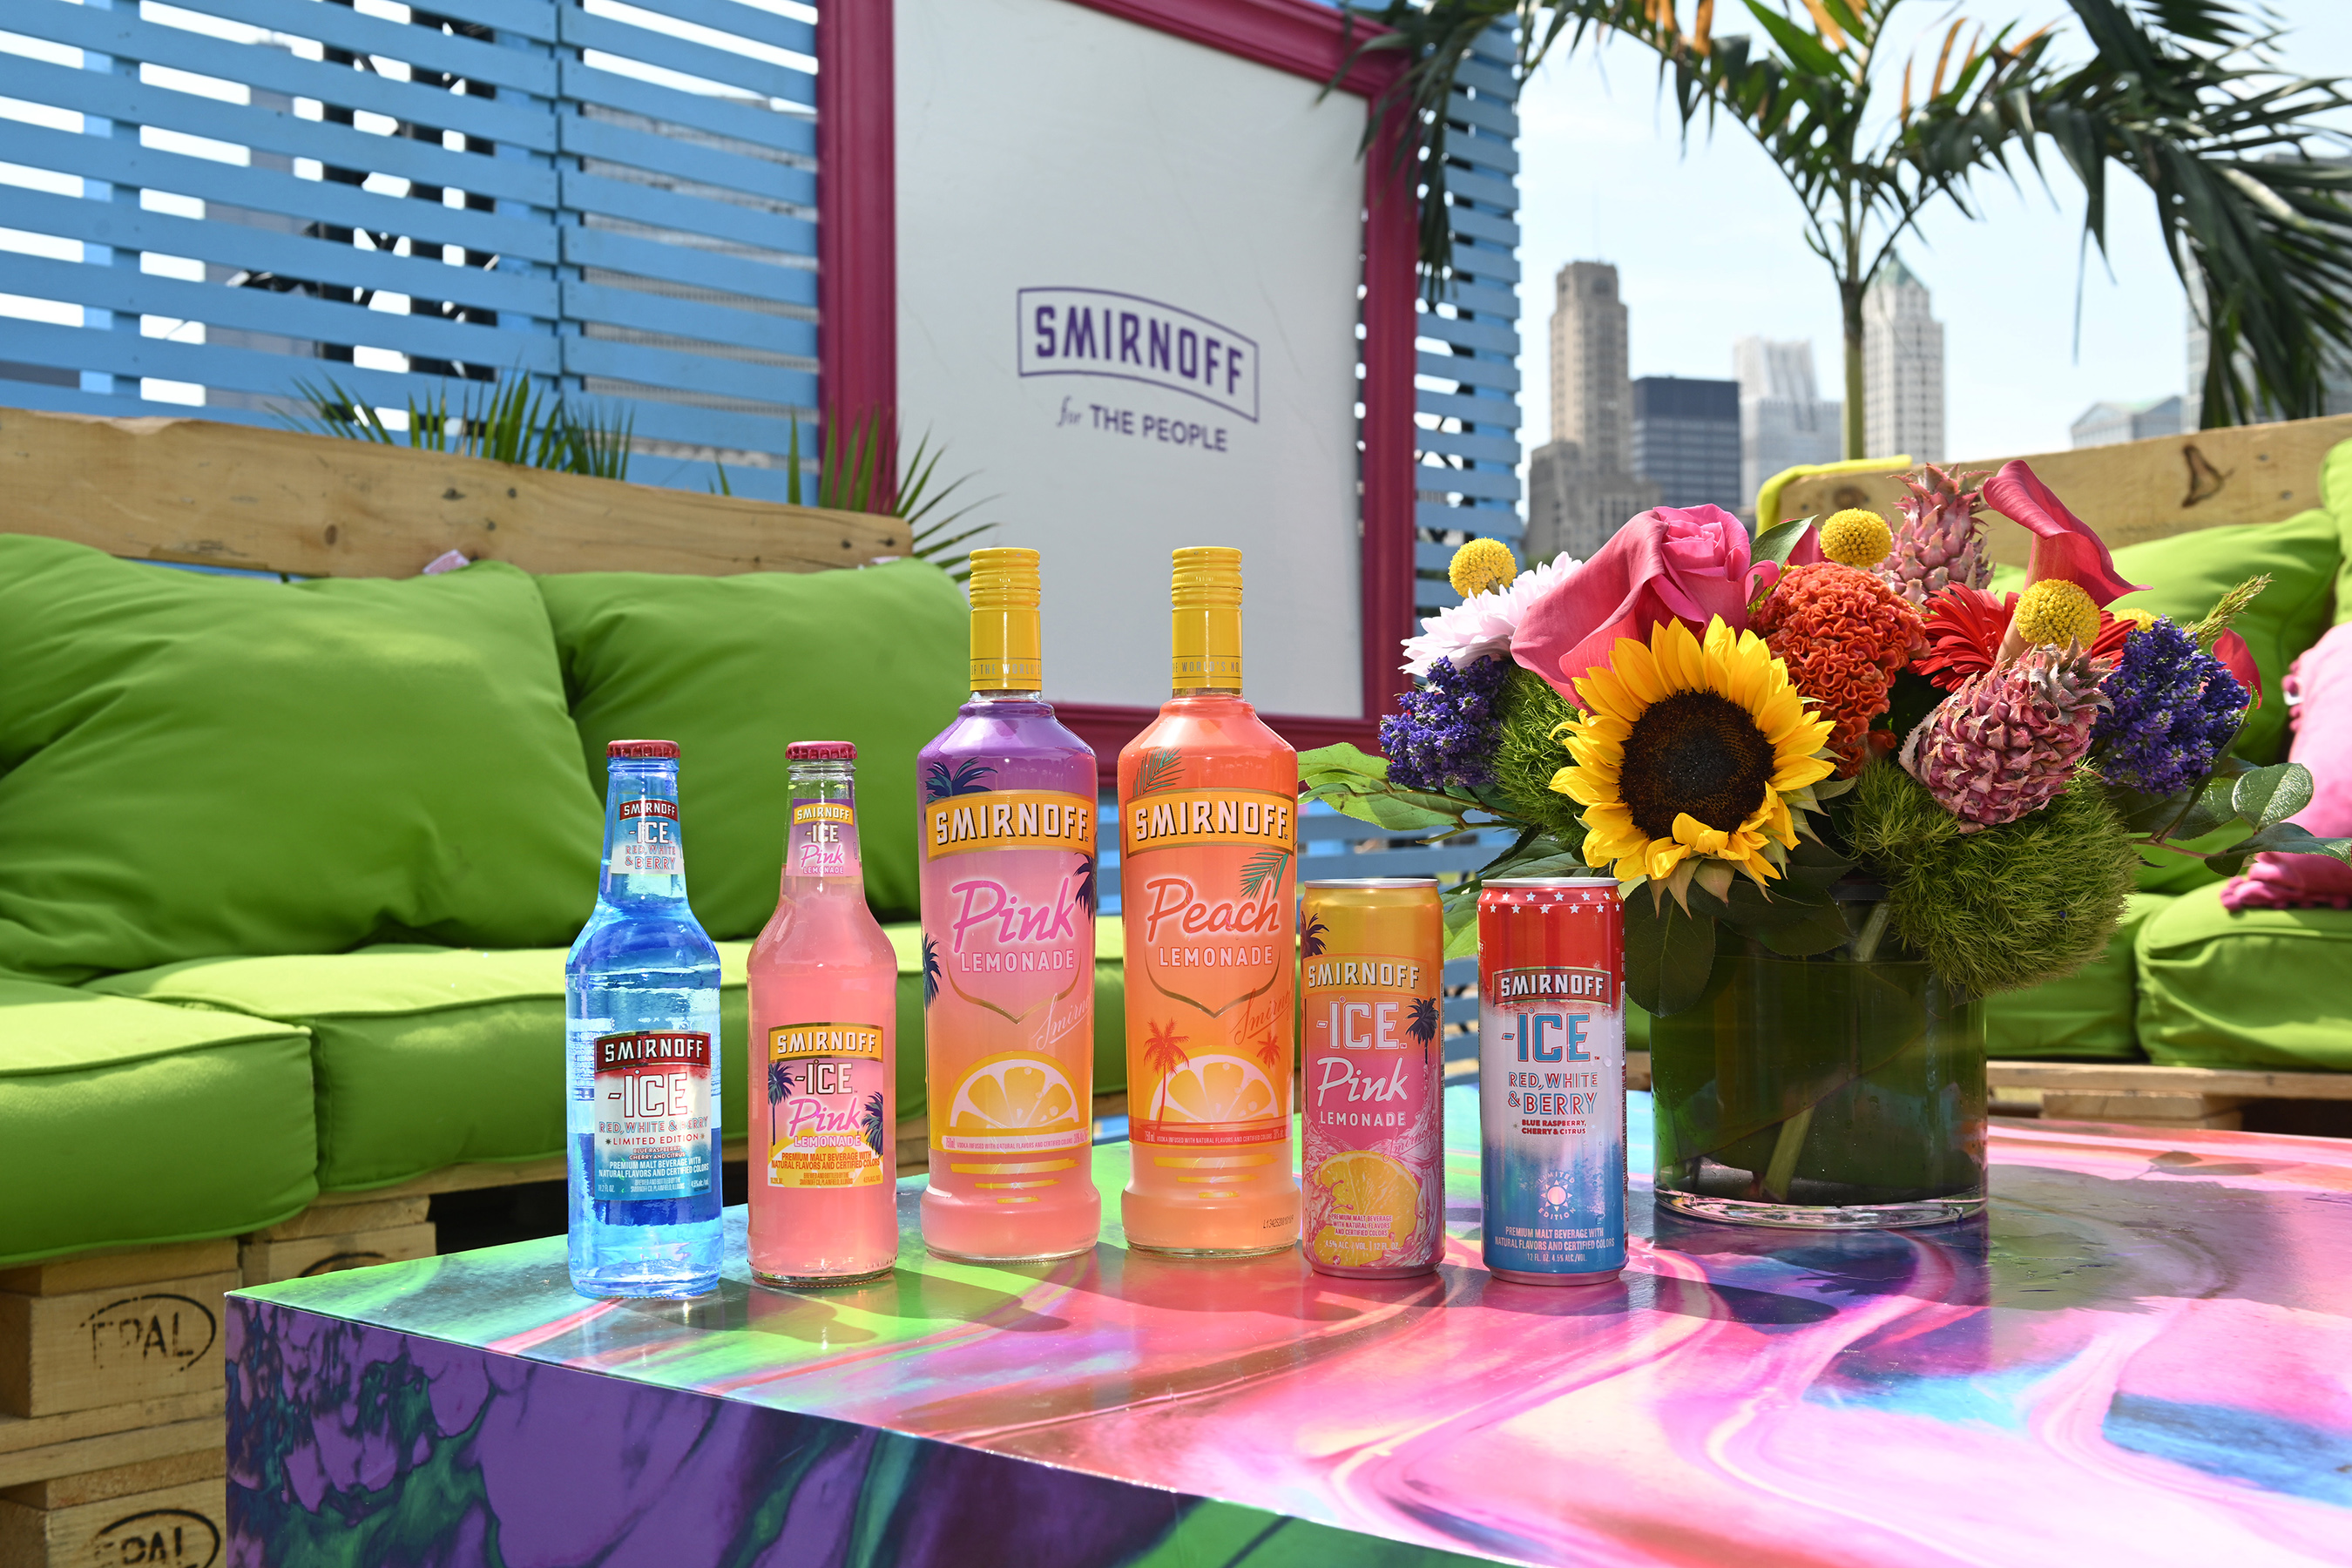 Vast and always expanding, Smirnoff’s diverse lineup for adults 21+ reflects the full spectrum of individual tastes in the LGBTQUIA+ community.